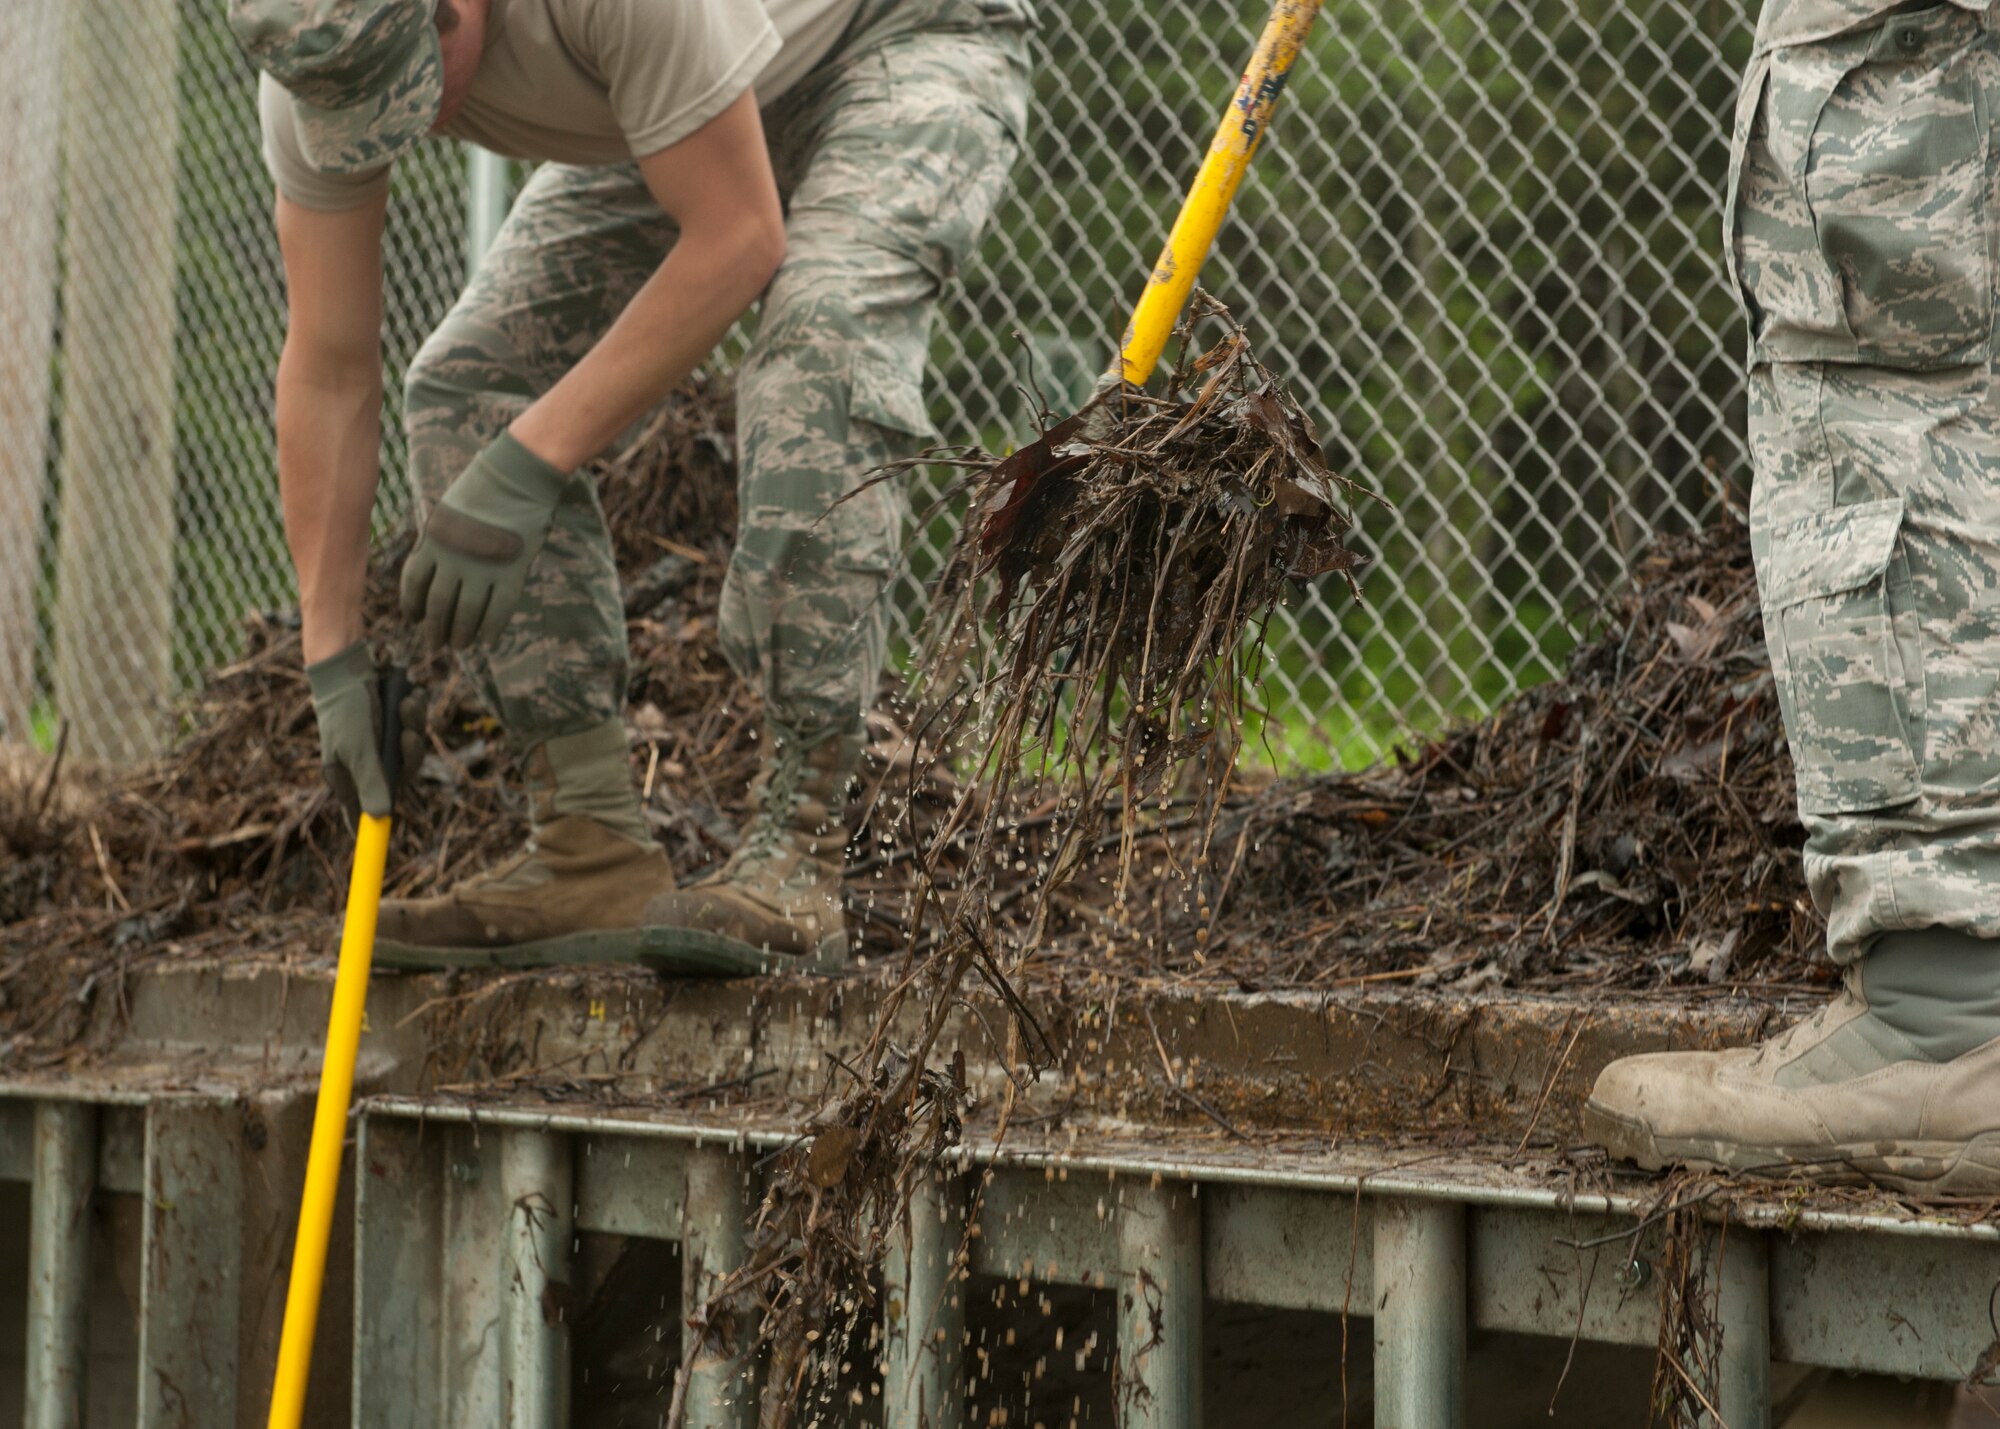 Members from the 19th Civil Engineer Squadron rake debris from a culvert that can slow and clog drainage systems April 13, 2015, at Little Rock Air Force Base, Ark. The Dirt Boyz’s arsenal ranges from shovels and rakes to dozers and excavators. (U.S. Air Force photo by Airman 1st Scott Poe)